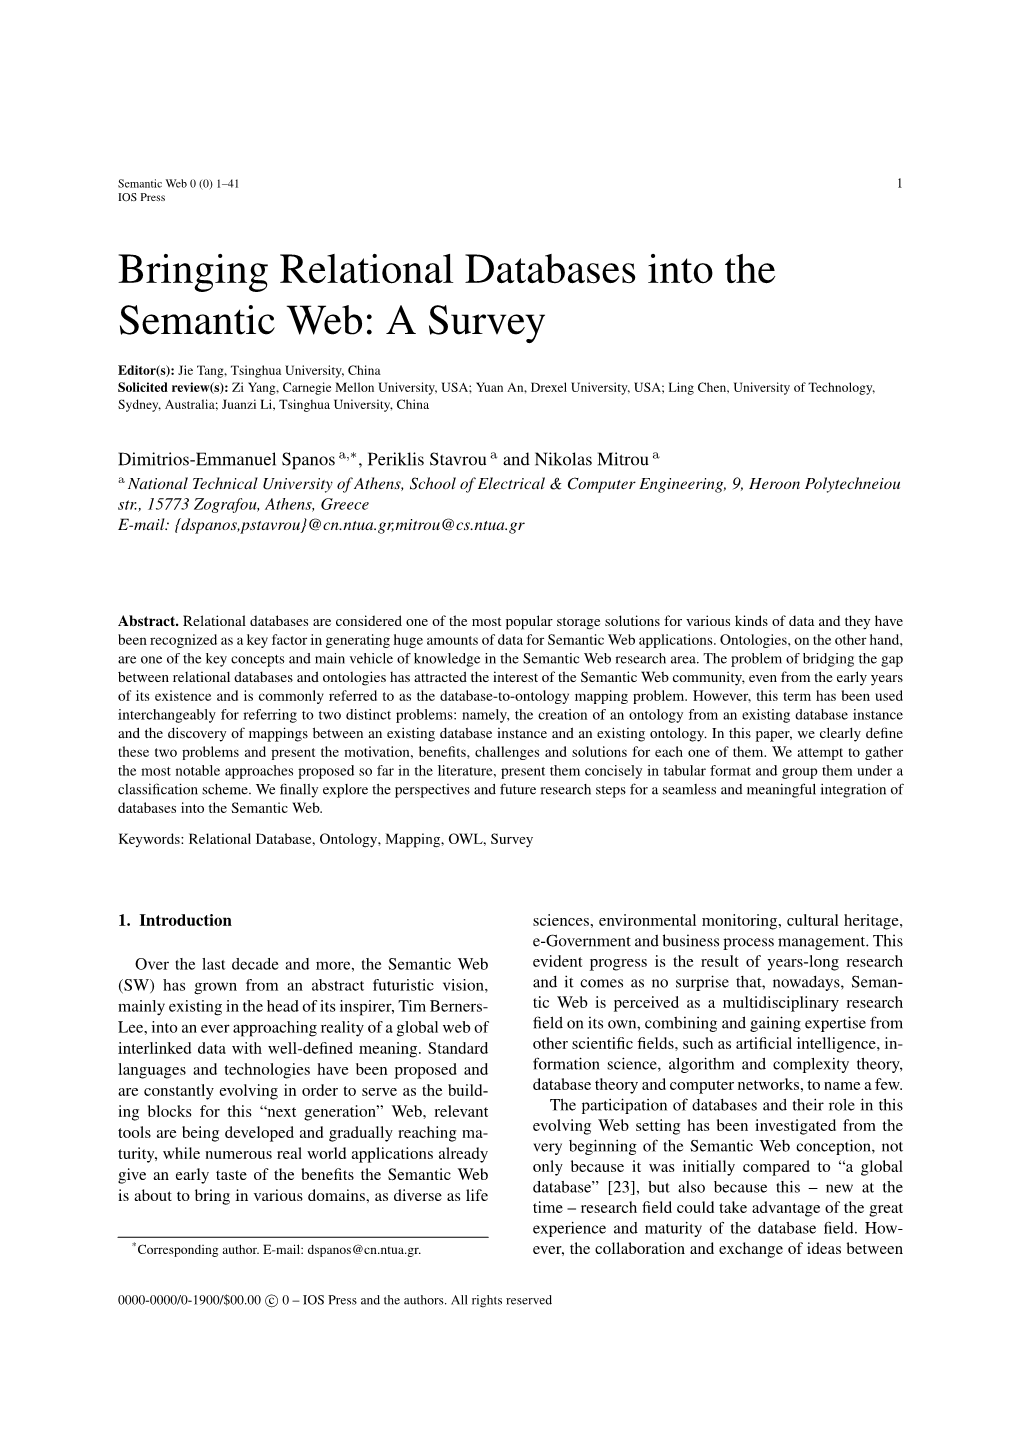 Bringing Relational Databases Into the Semantic Web: a Survey